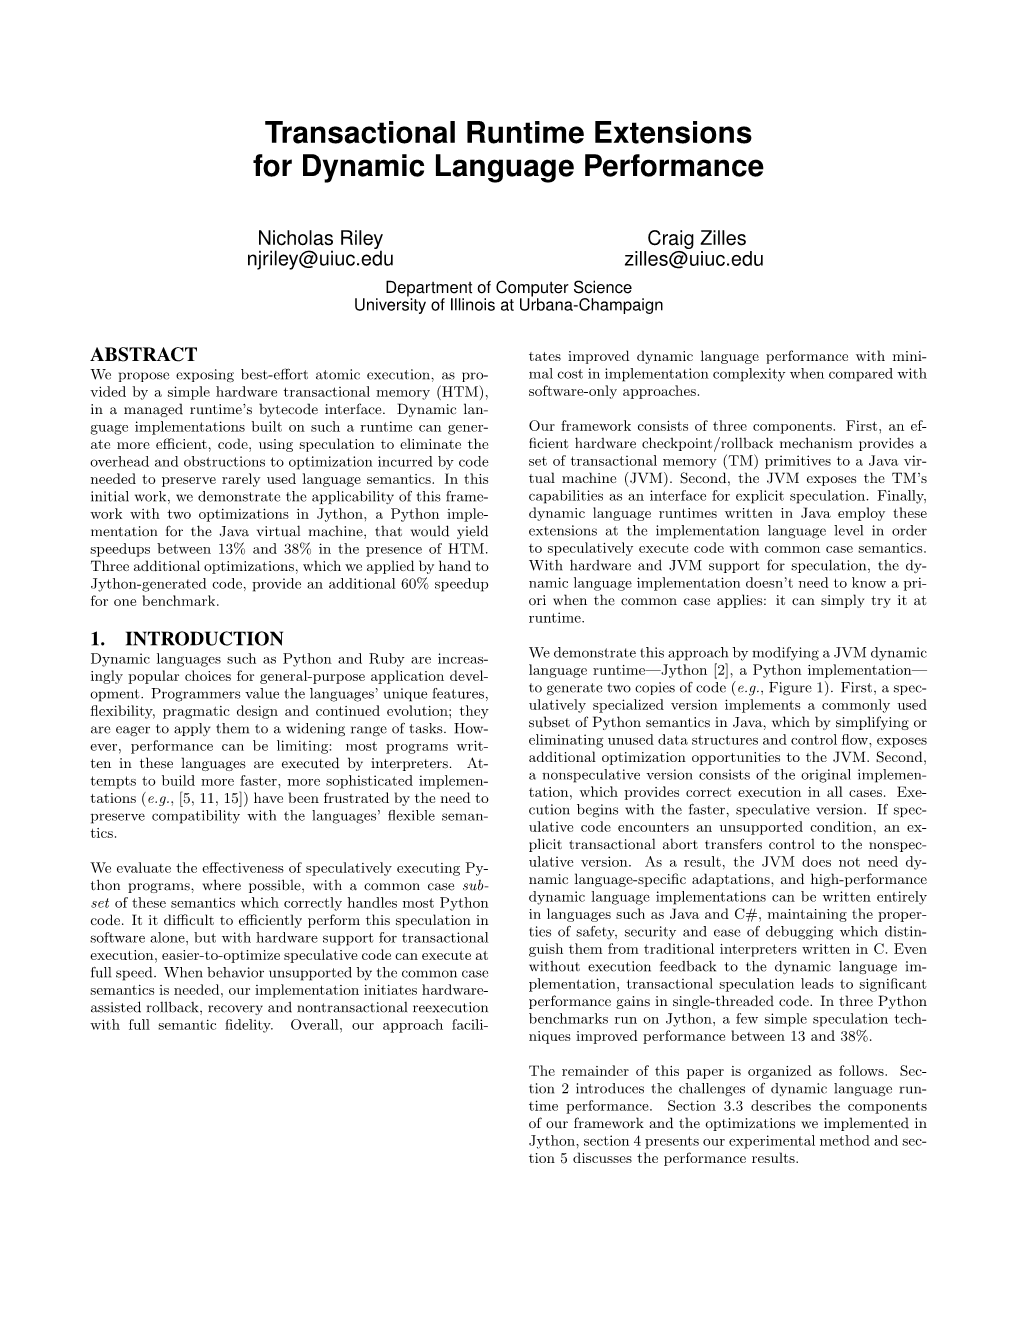 Transactional Runtime Extensions for Dynamic Language Performance